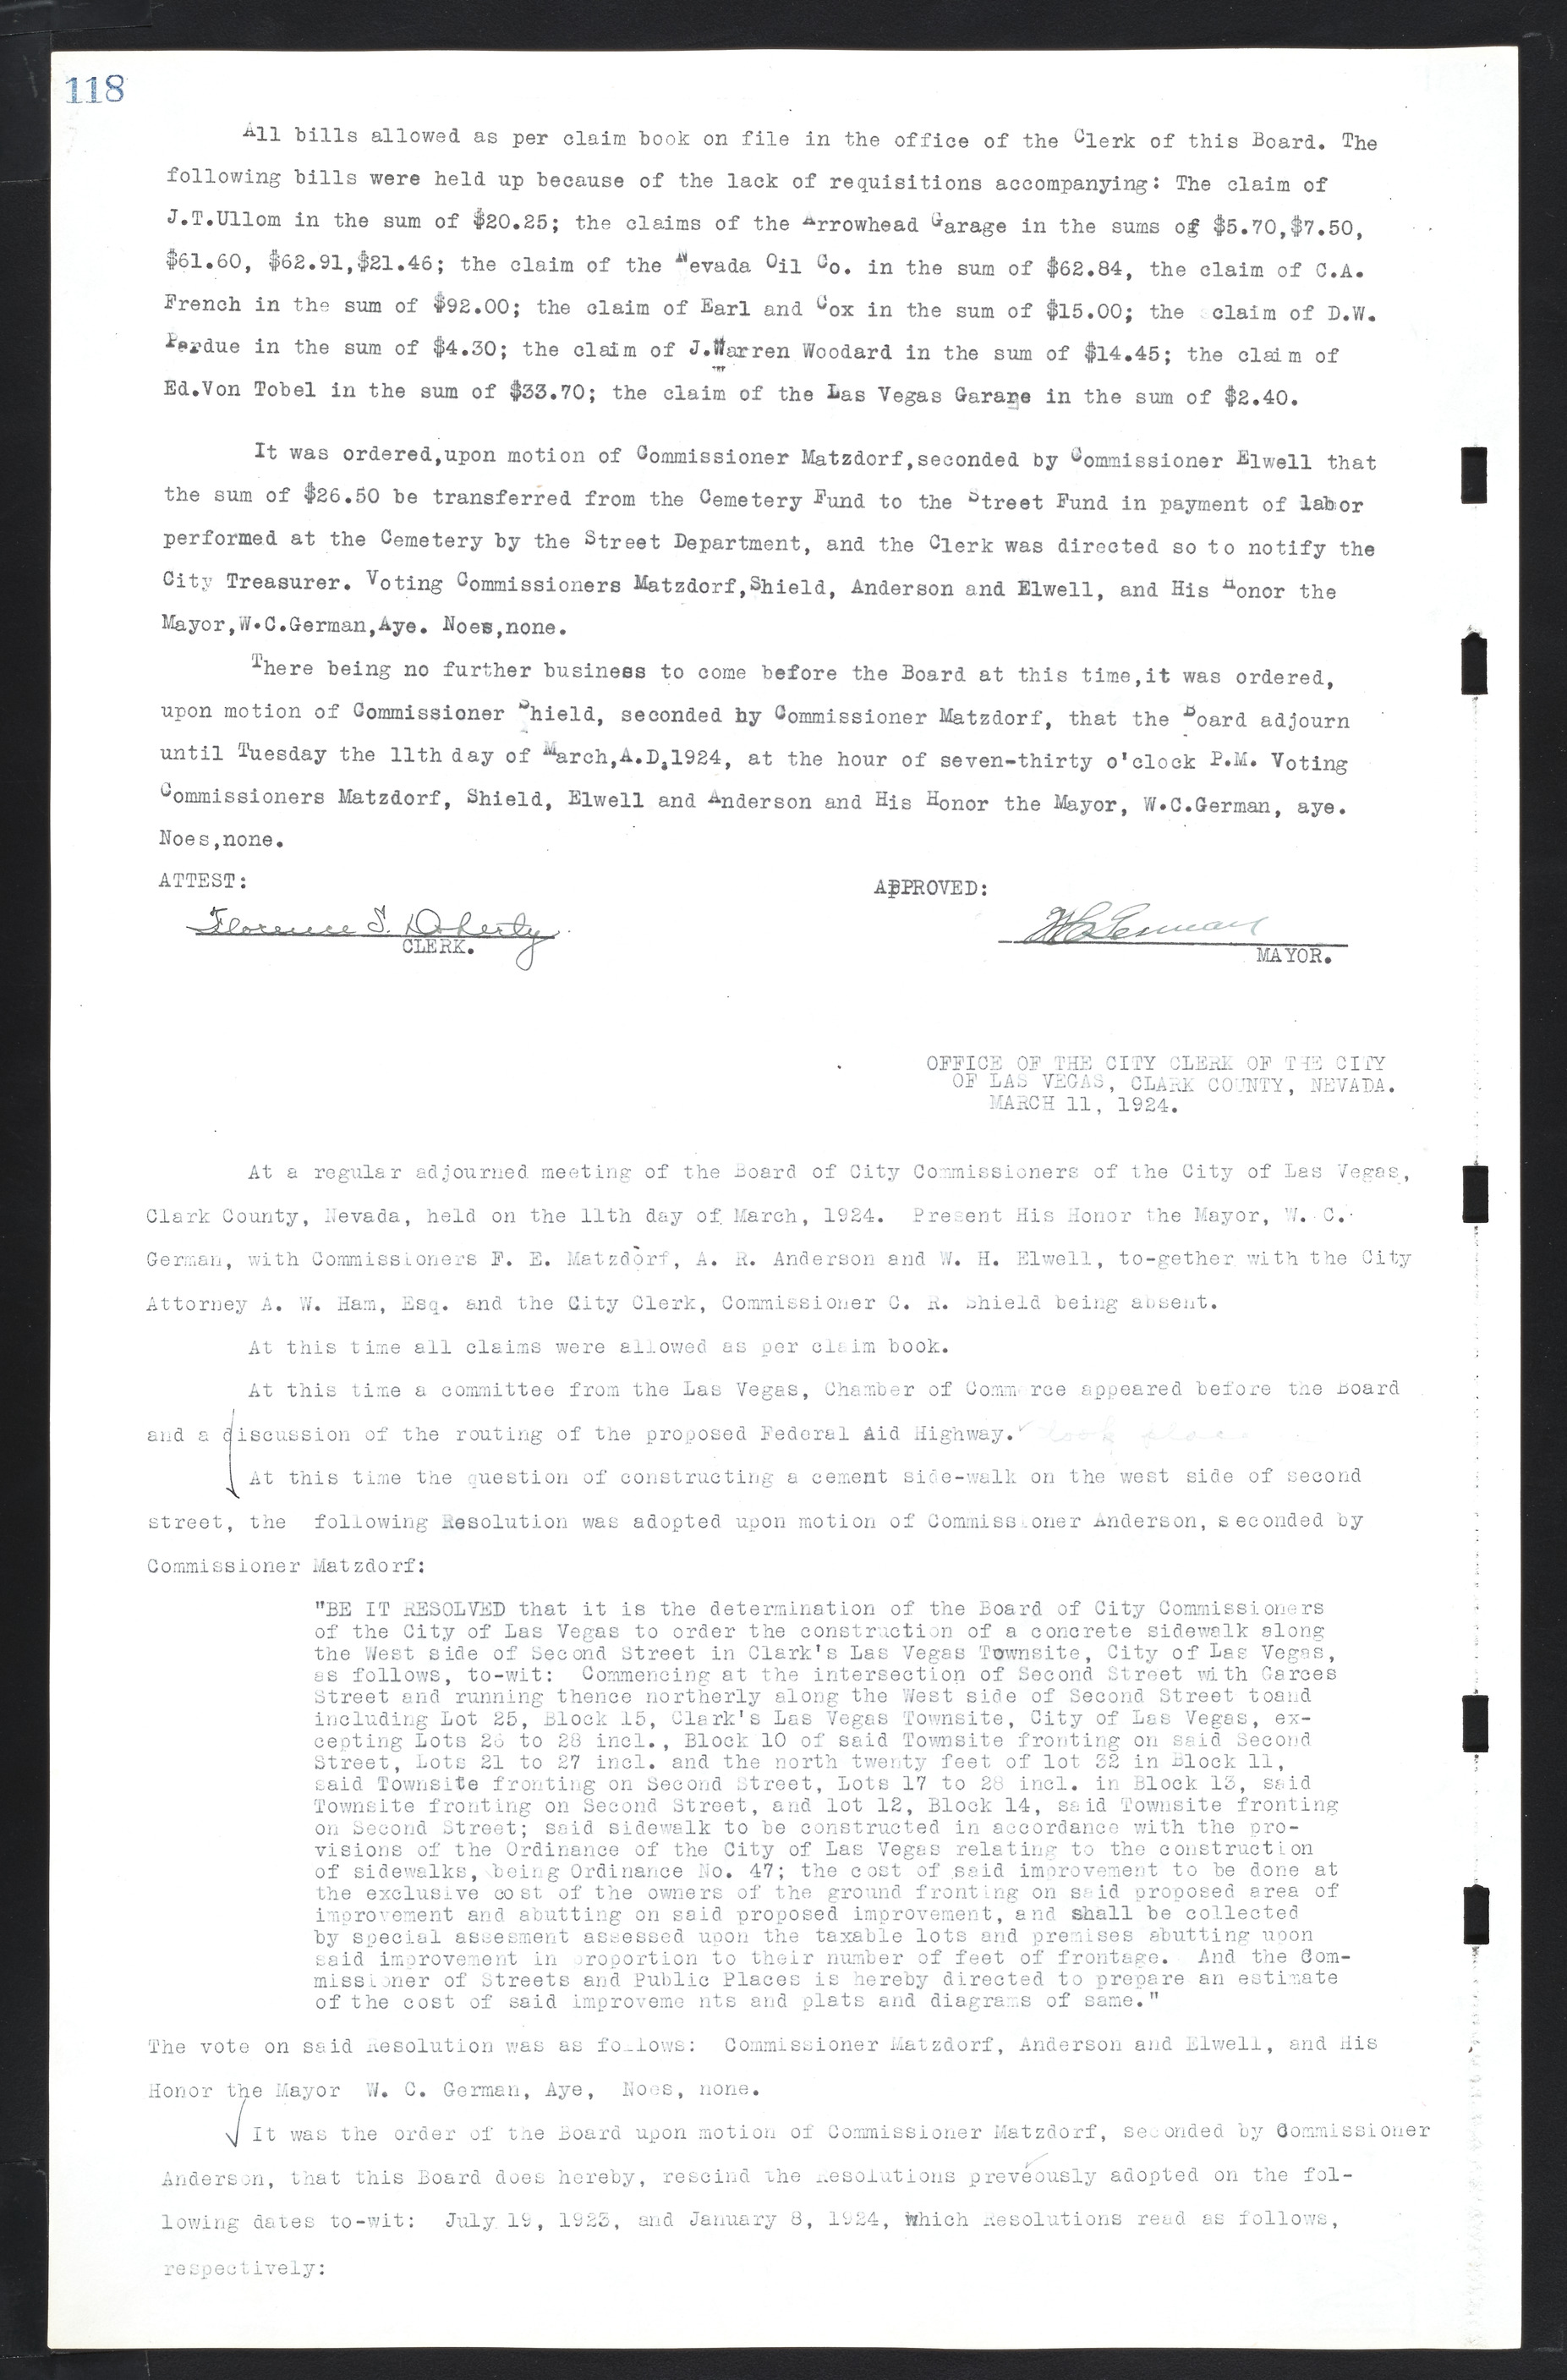 Las Vegas City Commission Minutes, March 1, 1922 to May 10, 1929, lvc000002-125